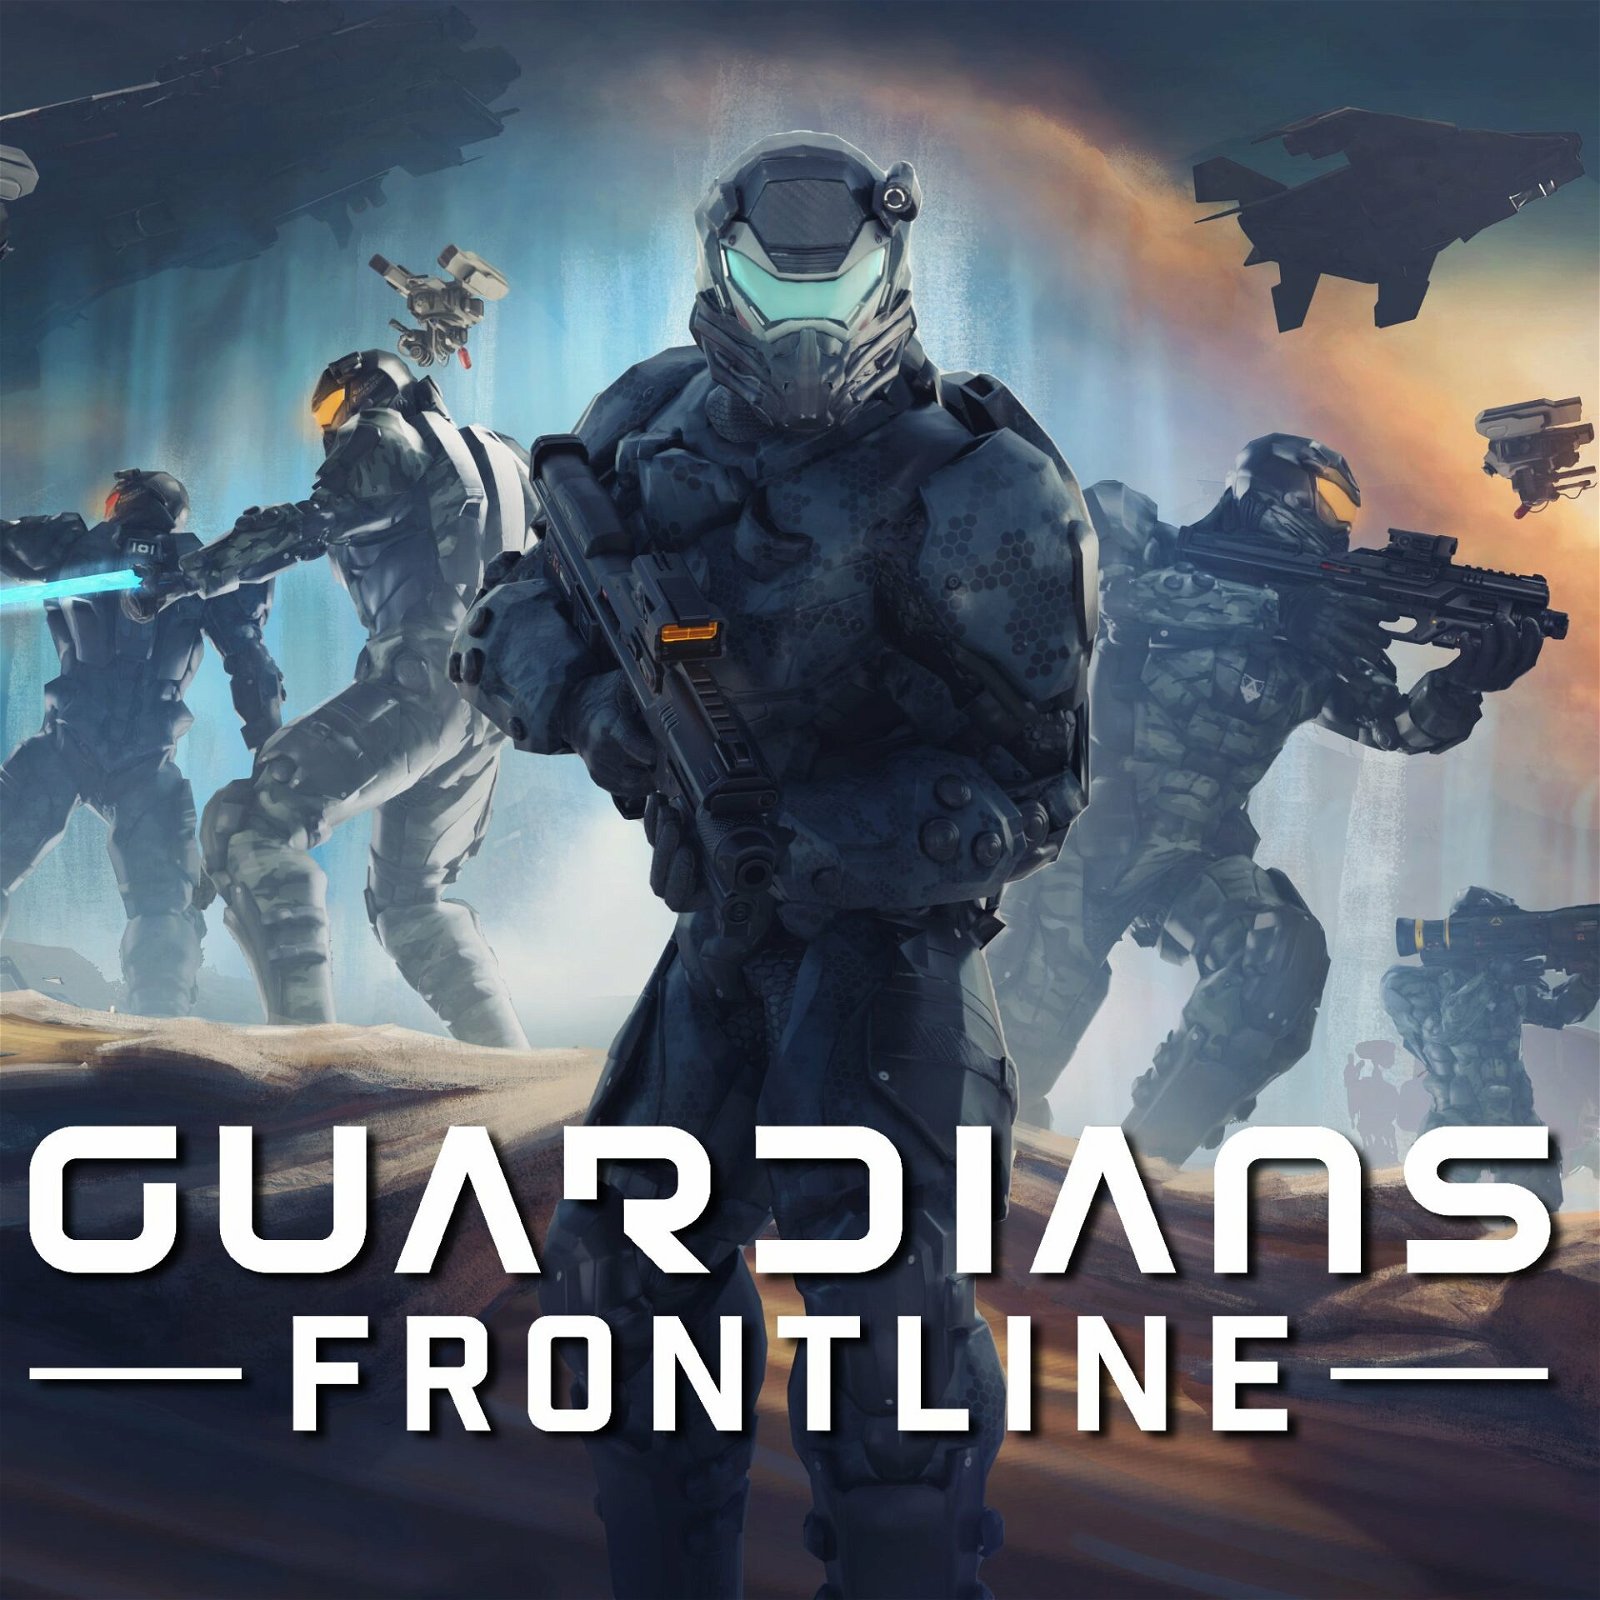 guardians frontline vr review 23032903